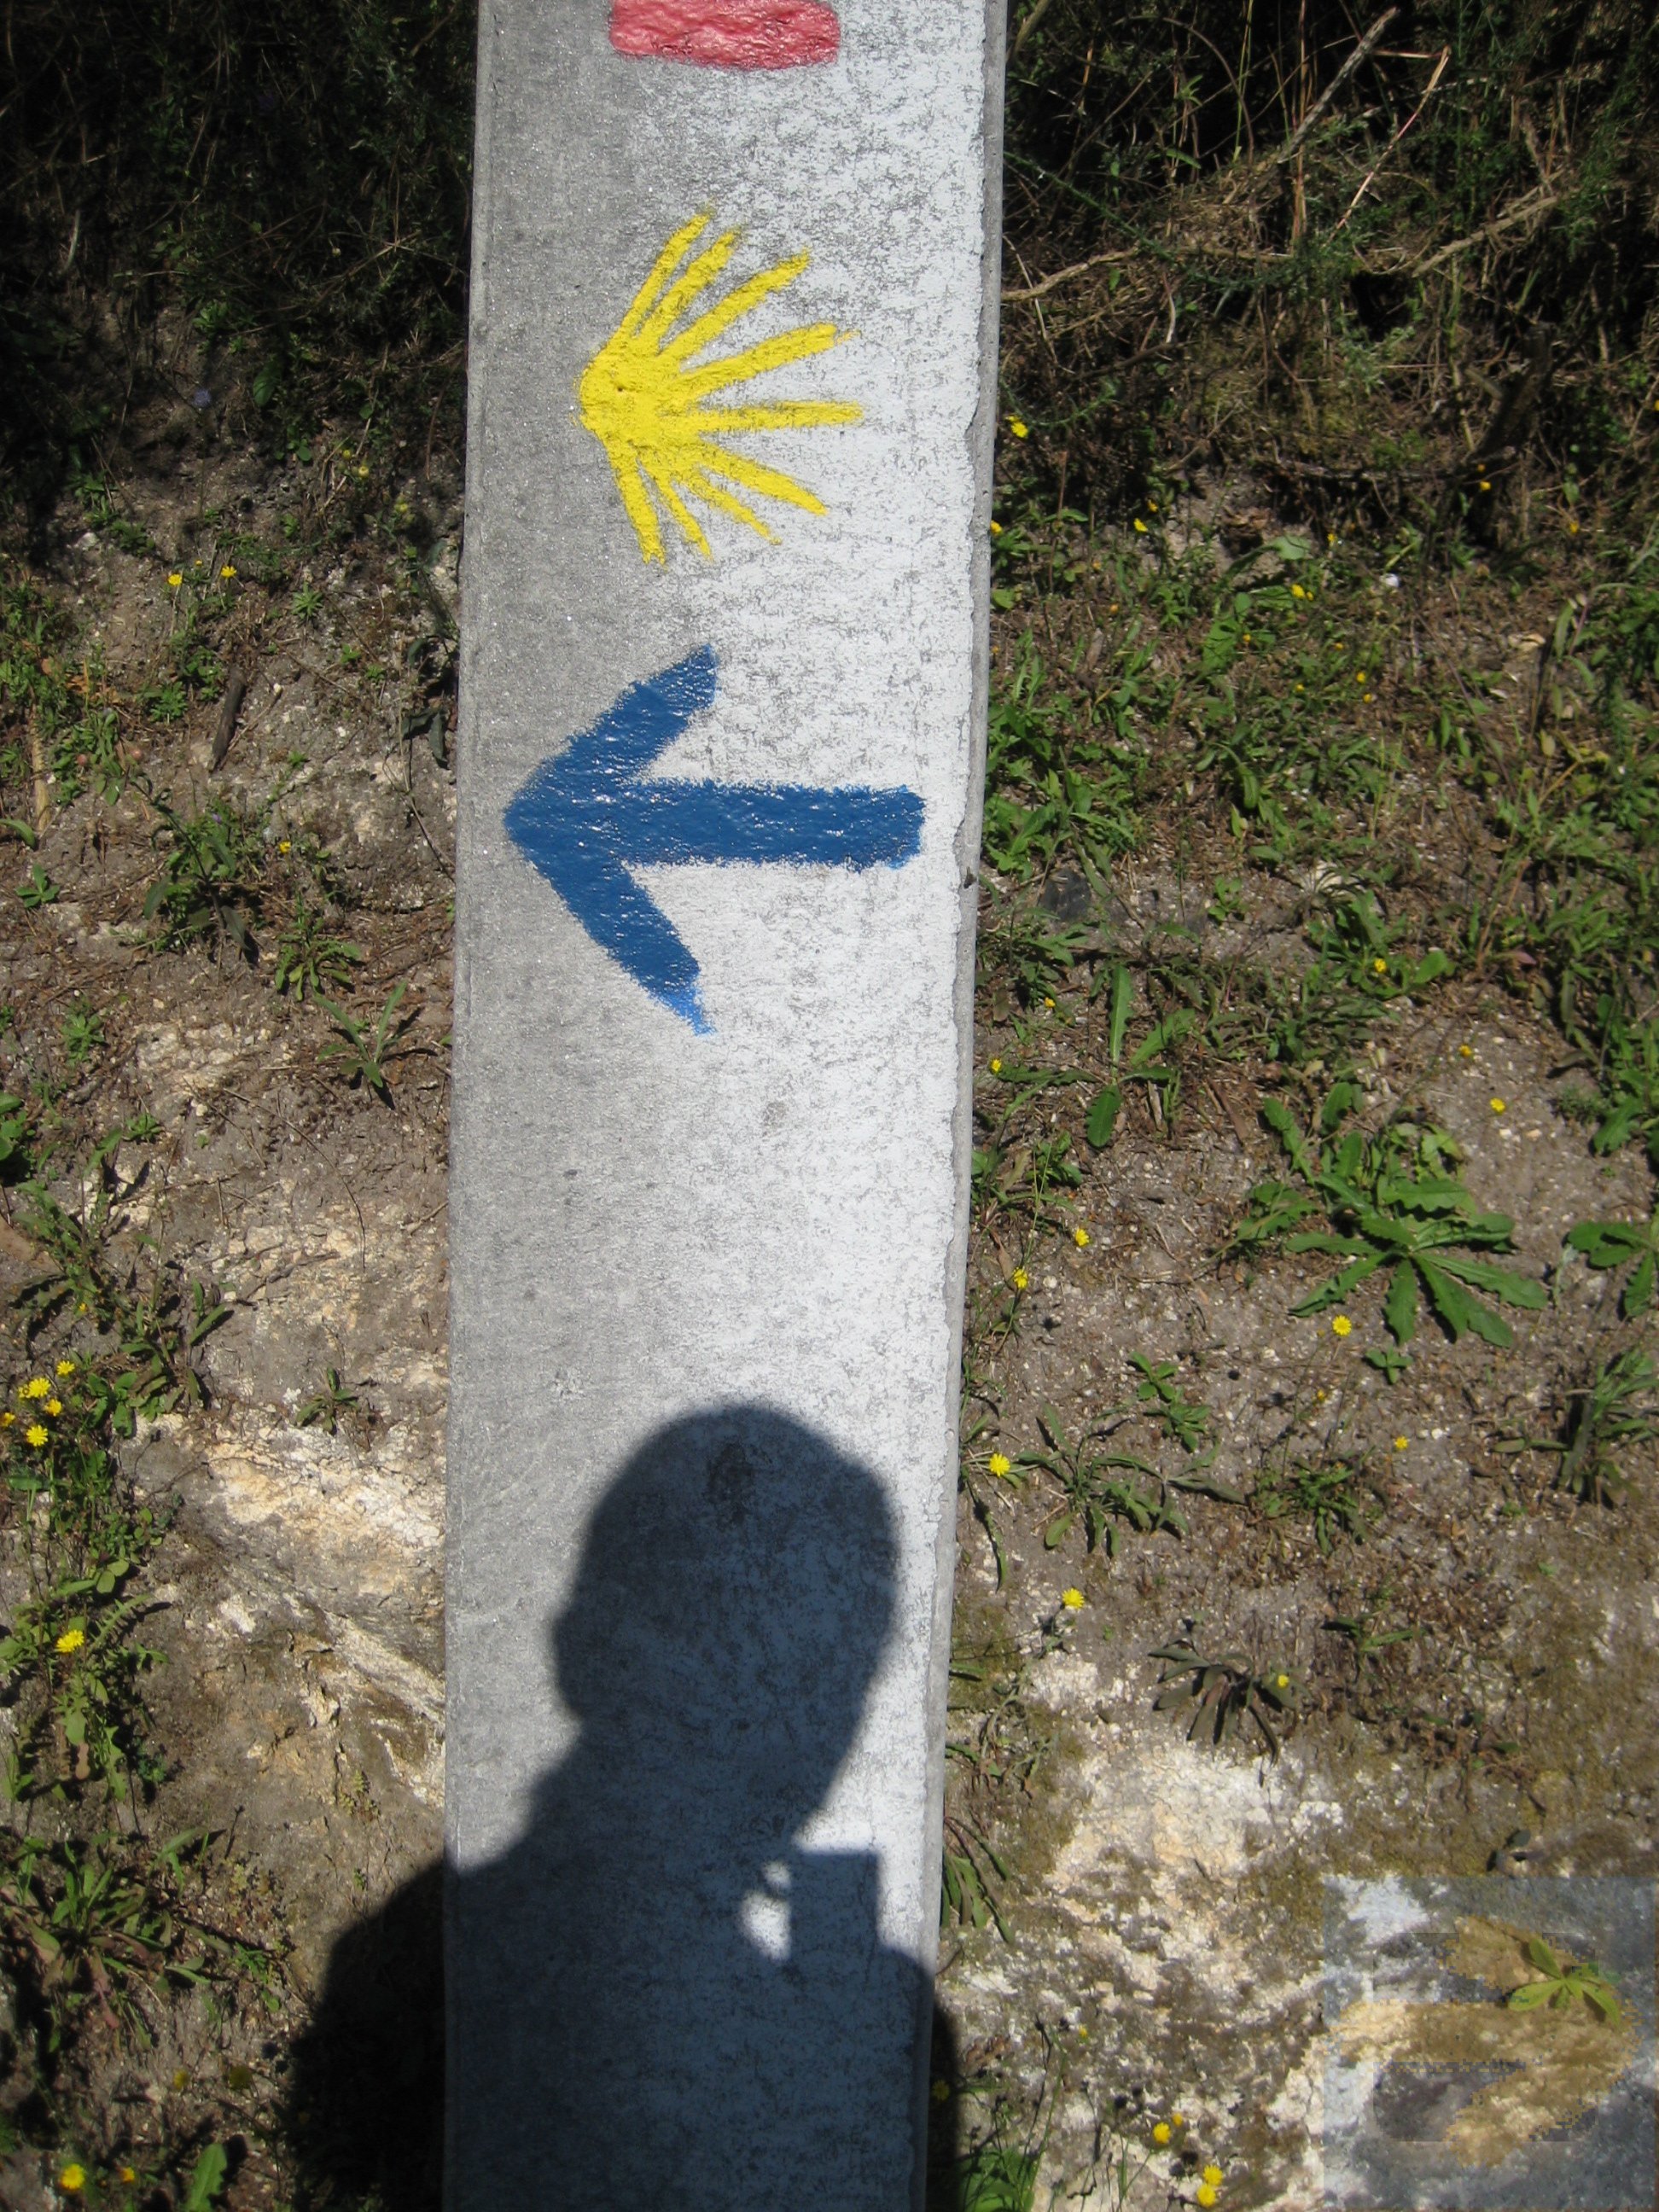 A Camino must - a shadow selfie